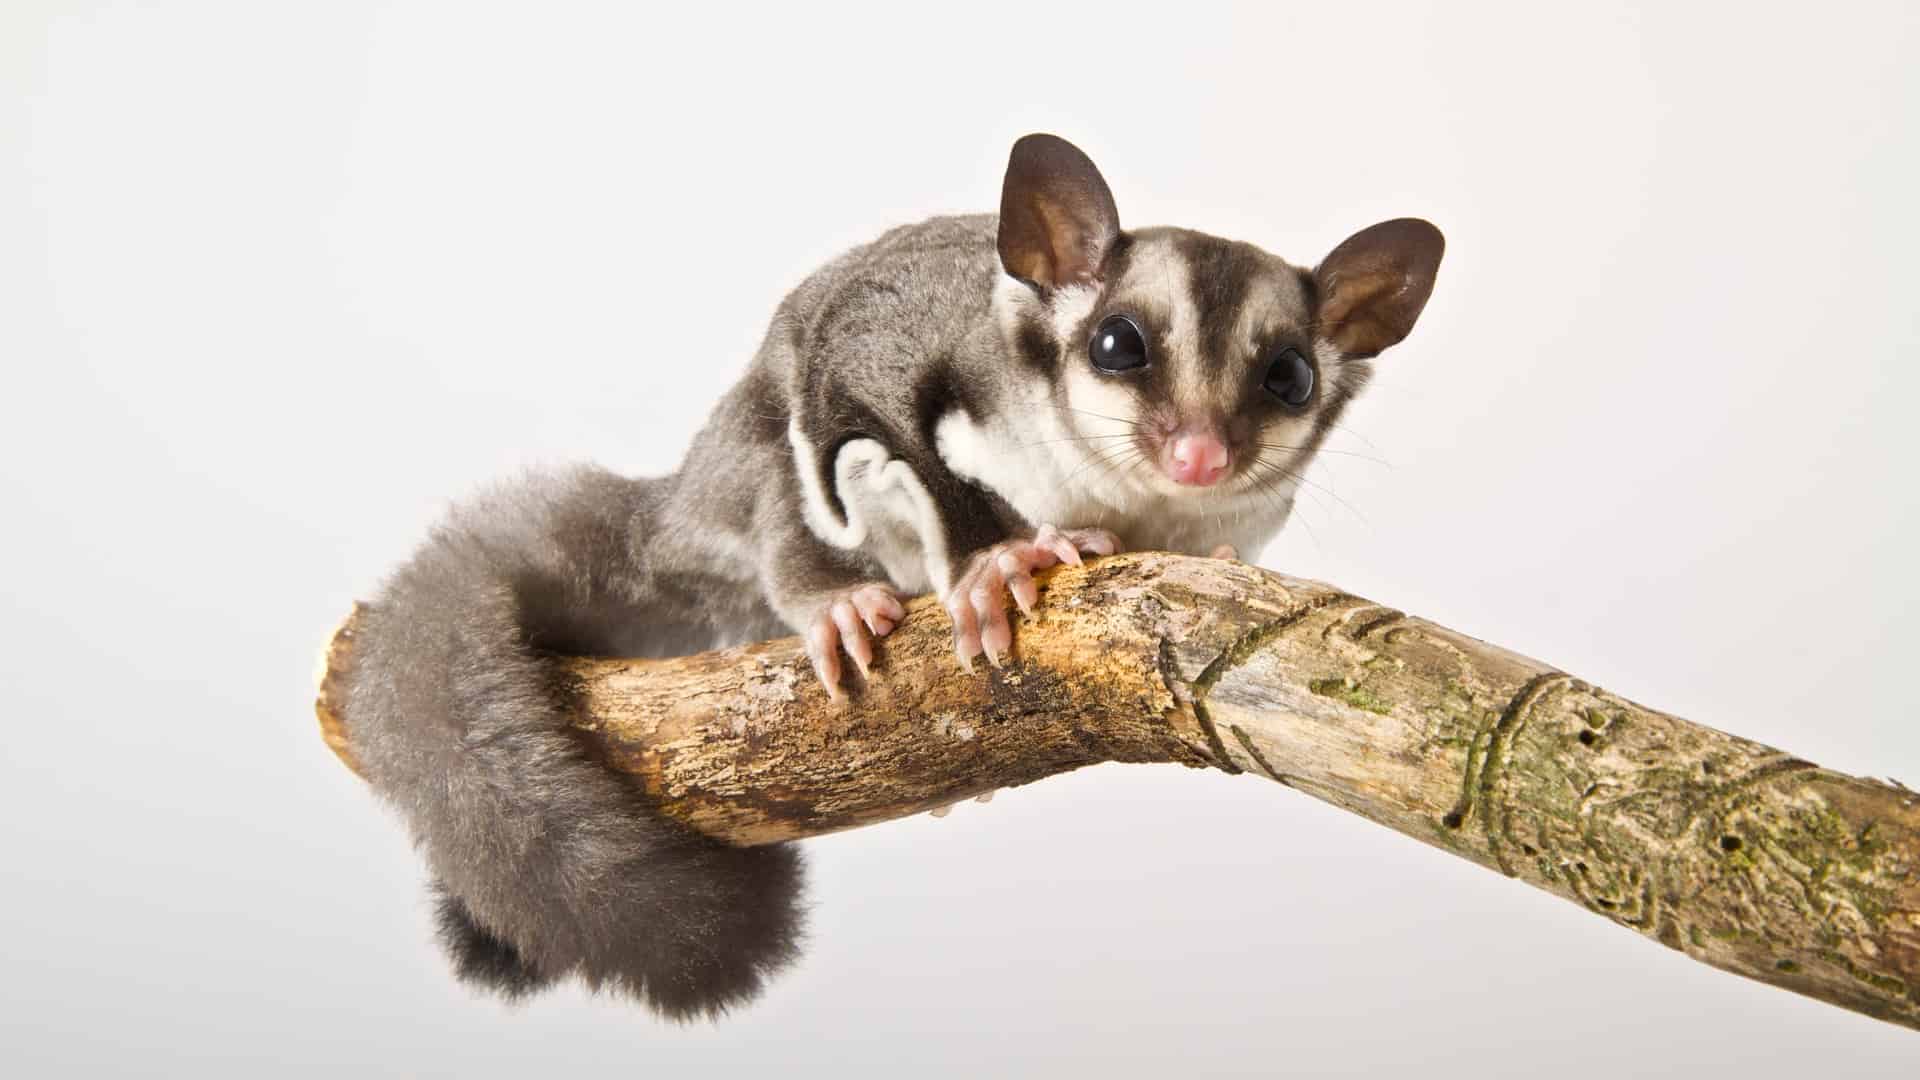 Looking for some sugar glider facts and info to help you decide if they're the right pet for you? Here's everything you need to know before adopting one!